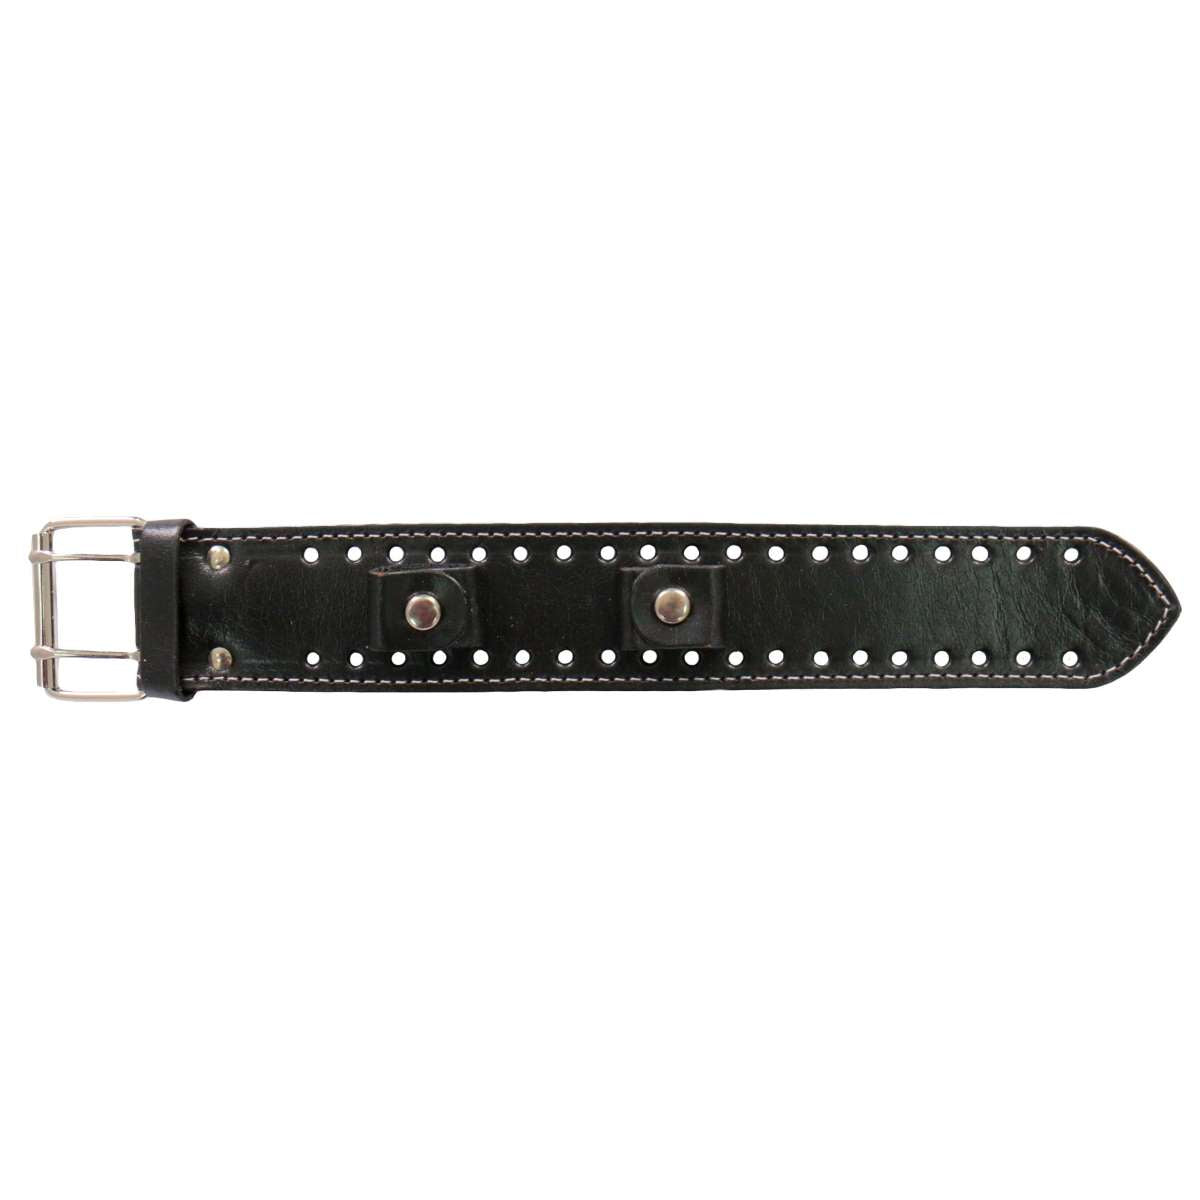 Hot Leathers 1.5" Black with Contrast Studs Watch Band WTB1023